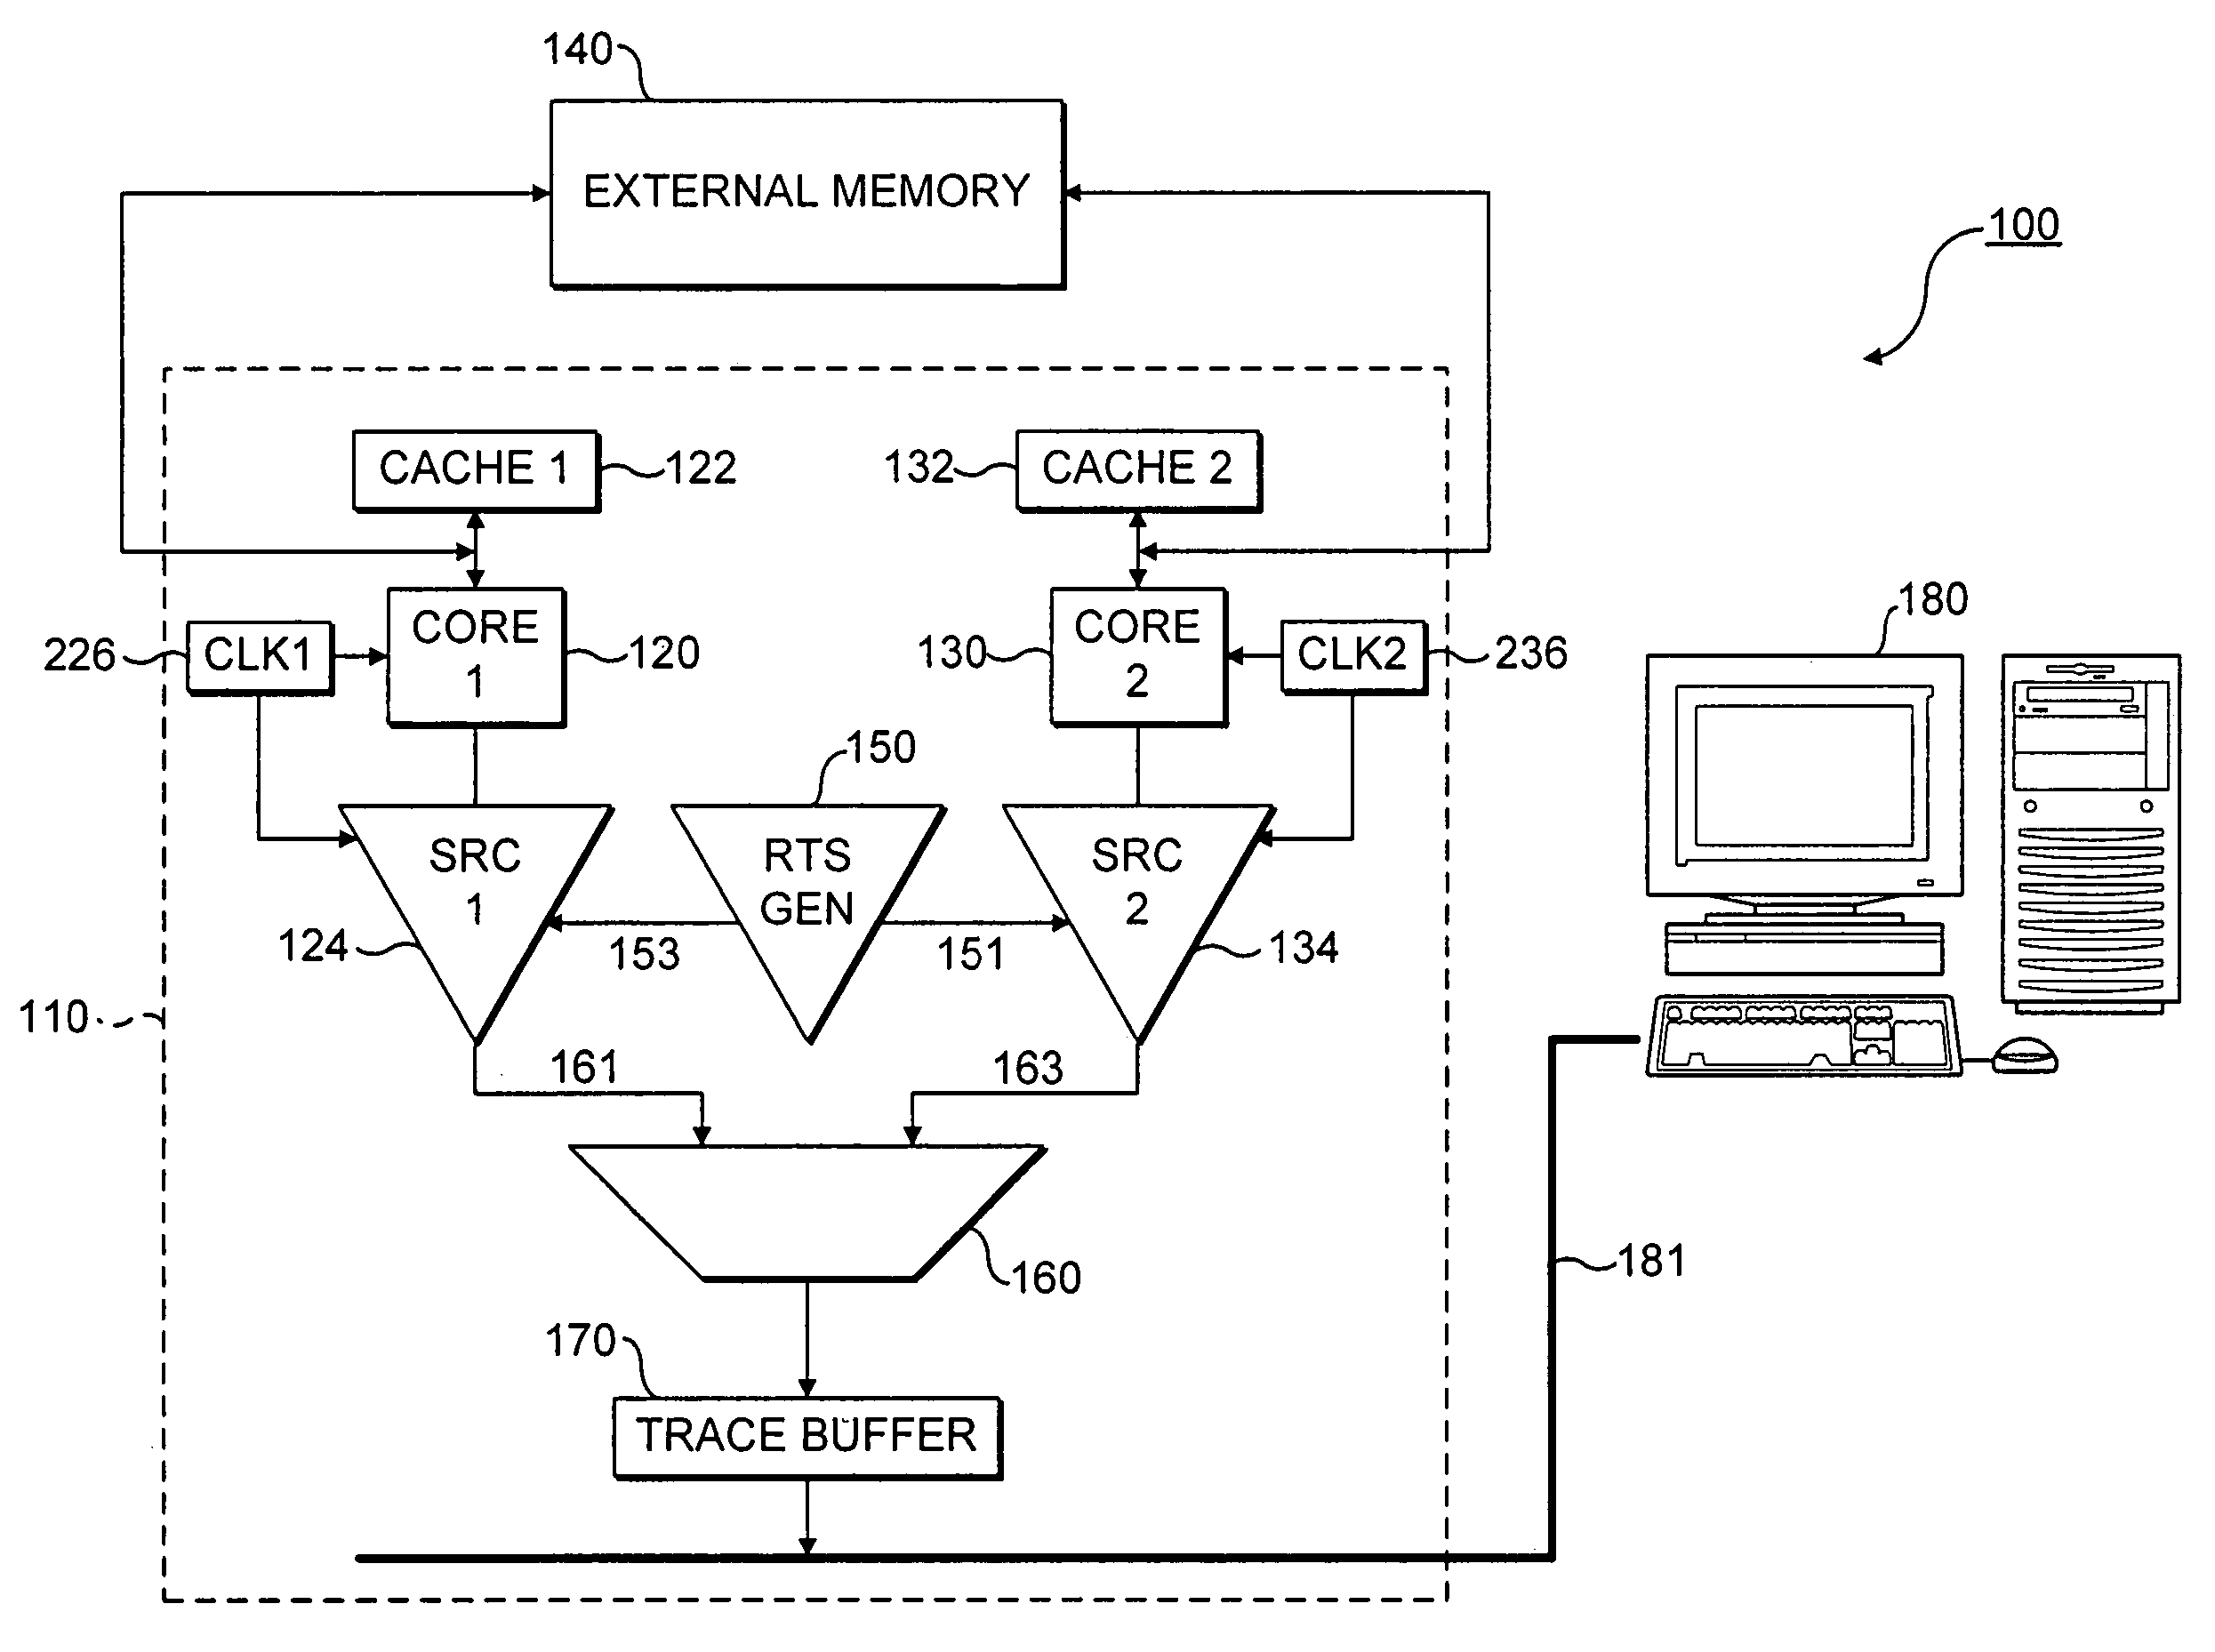 Trace source correlation in a data processing apparatus